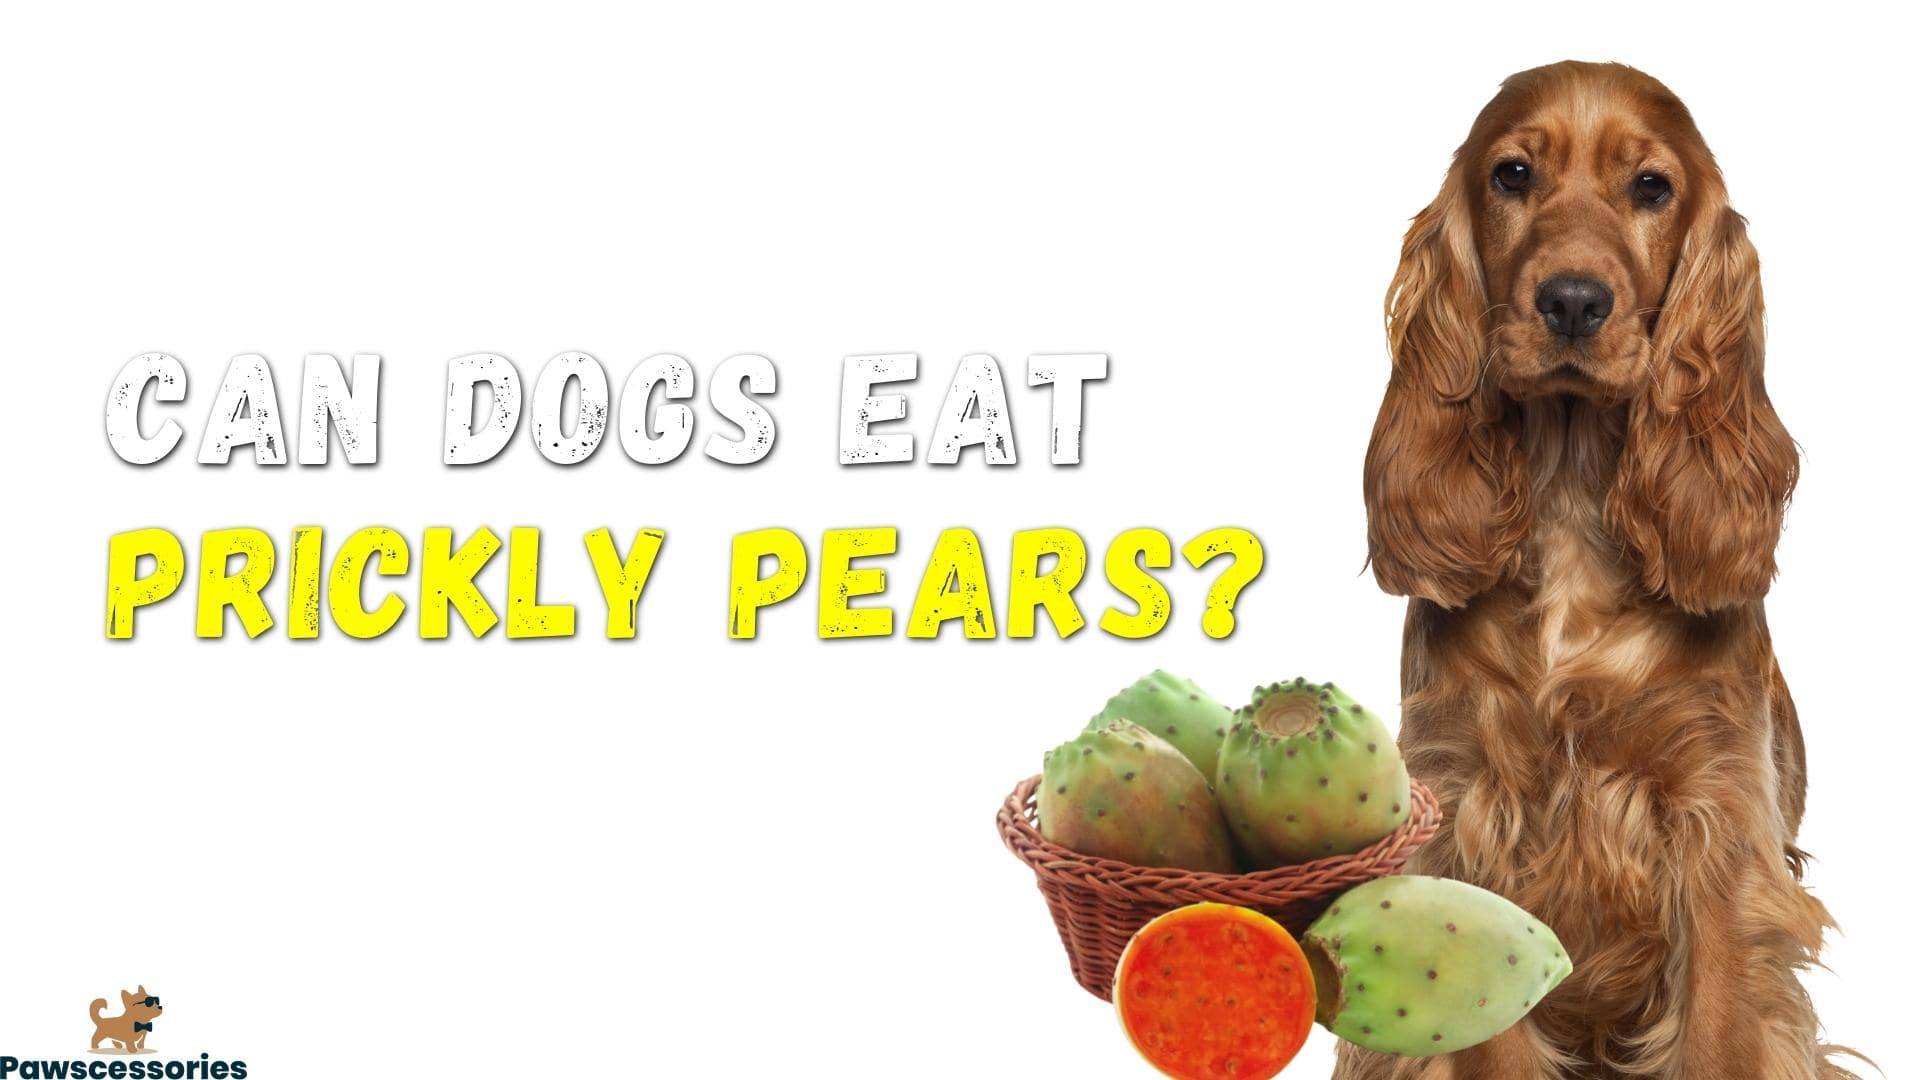 Can dogs eat prickly pears